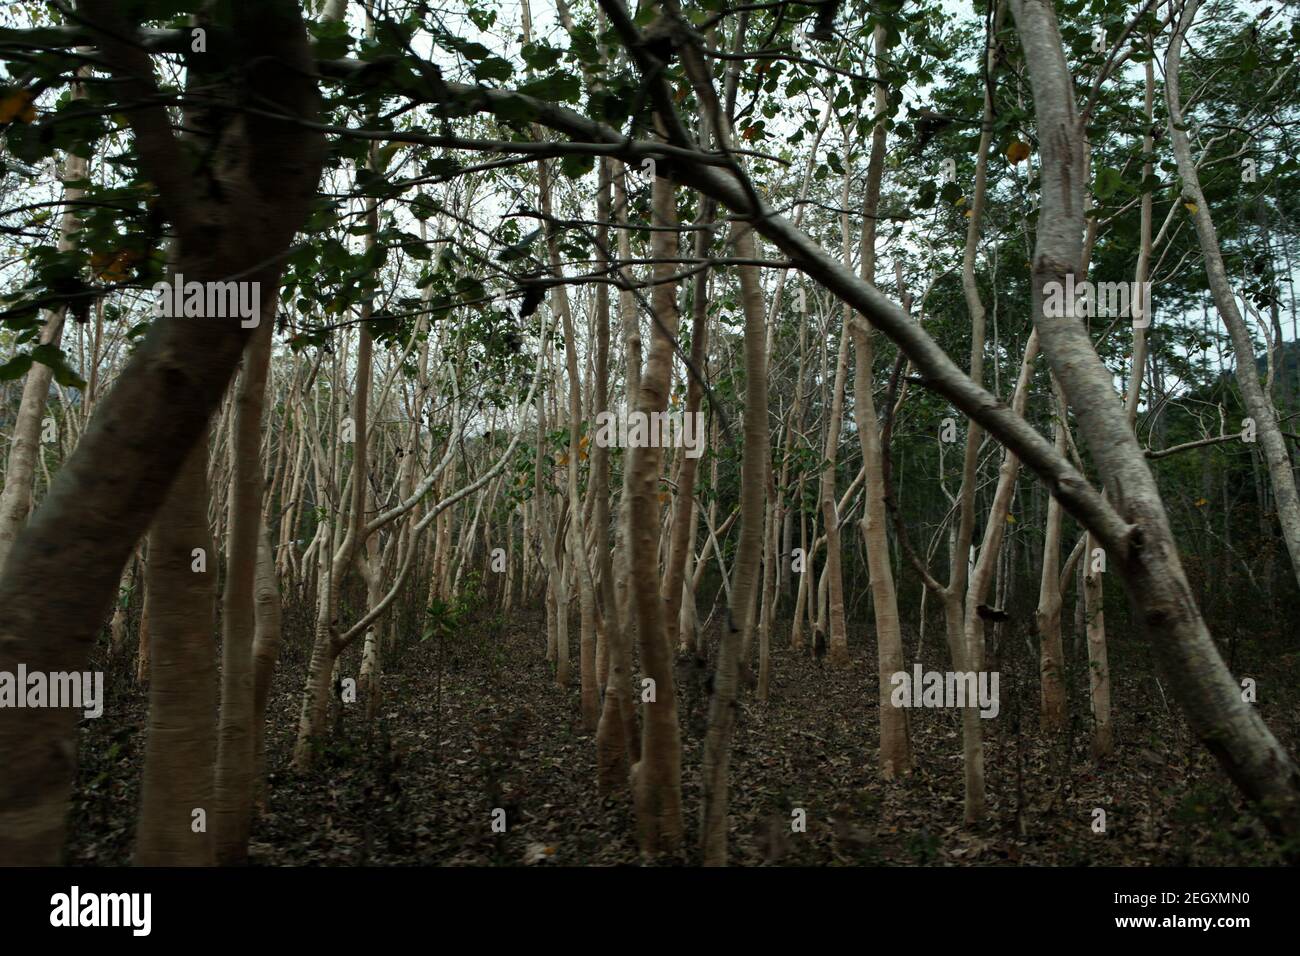 Teak hardwood tree forestry in Sumba, an island in eastern Indonesia where drought hits regularly. Stock Photo